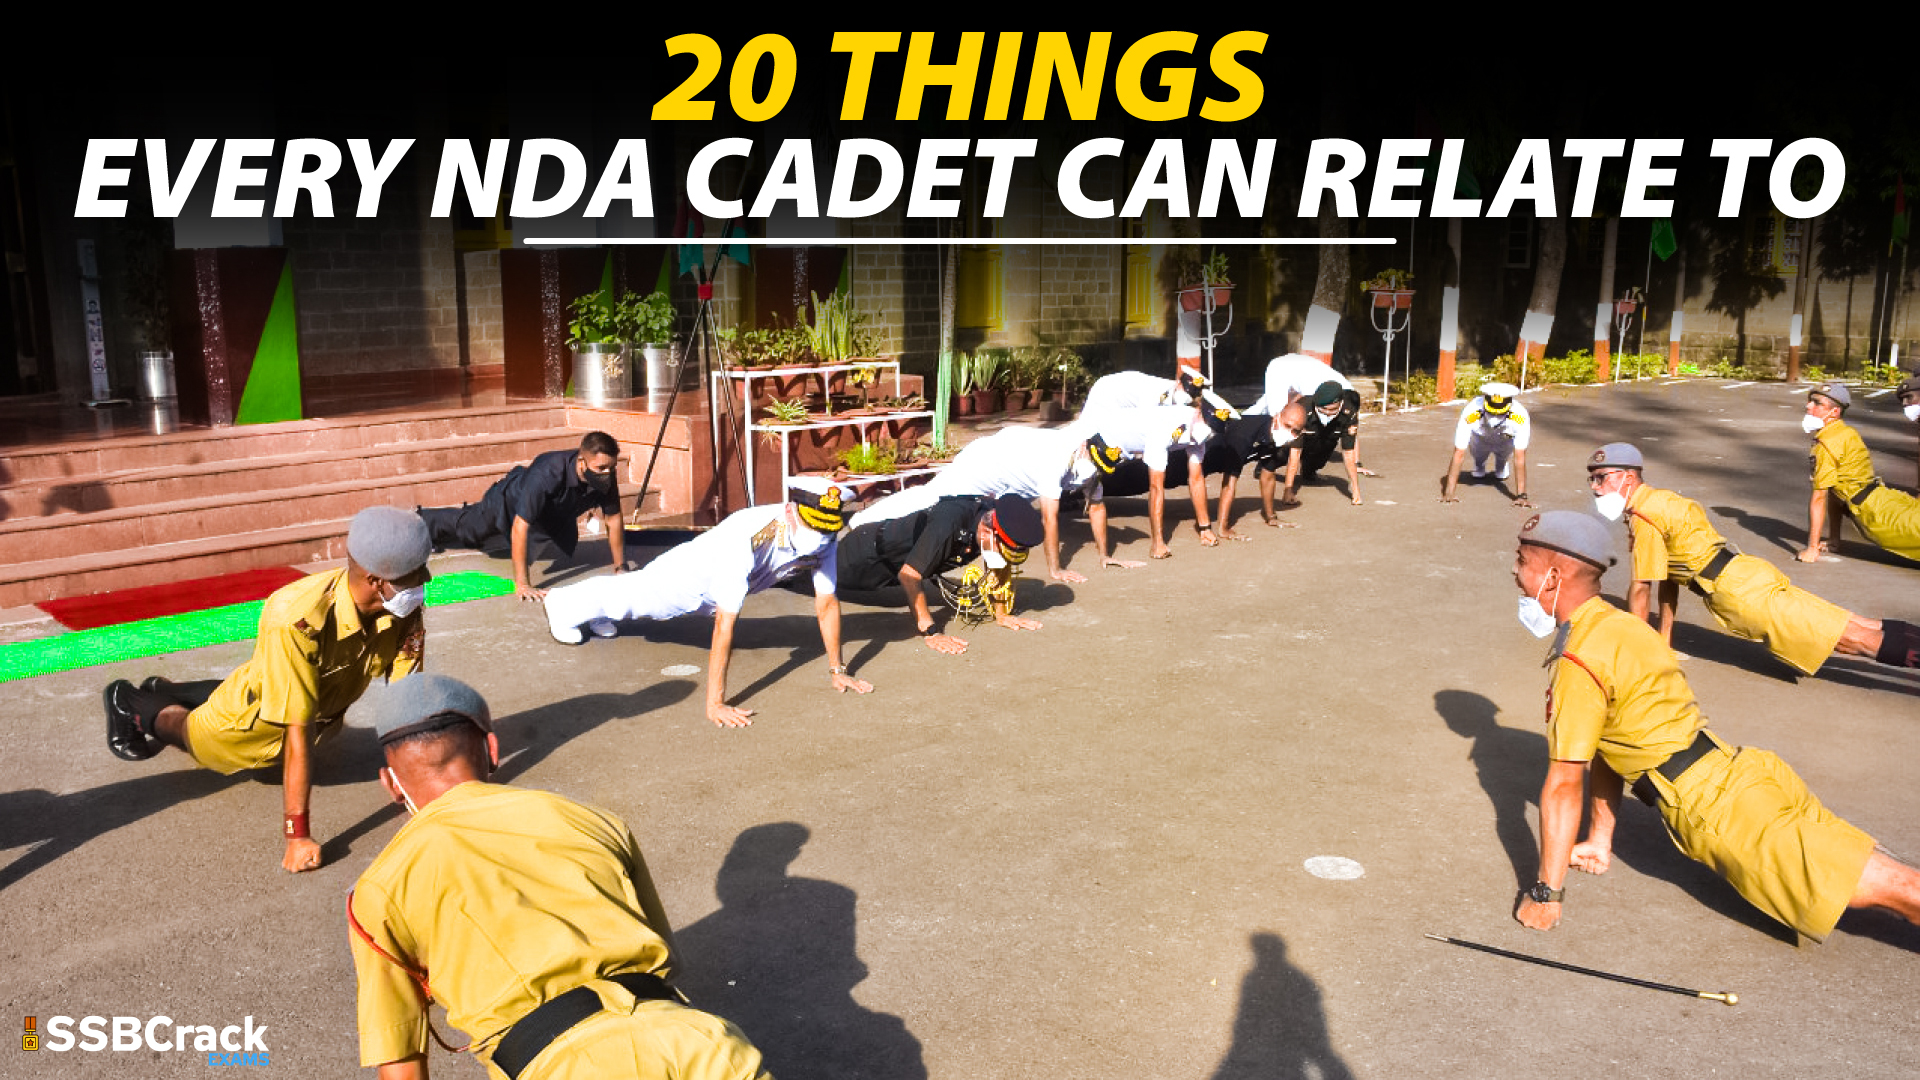 20 Things Every NDA Cadet Can Relate To